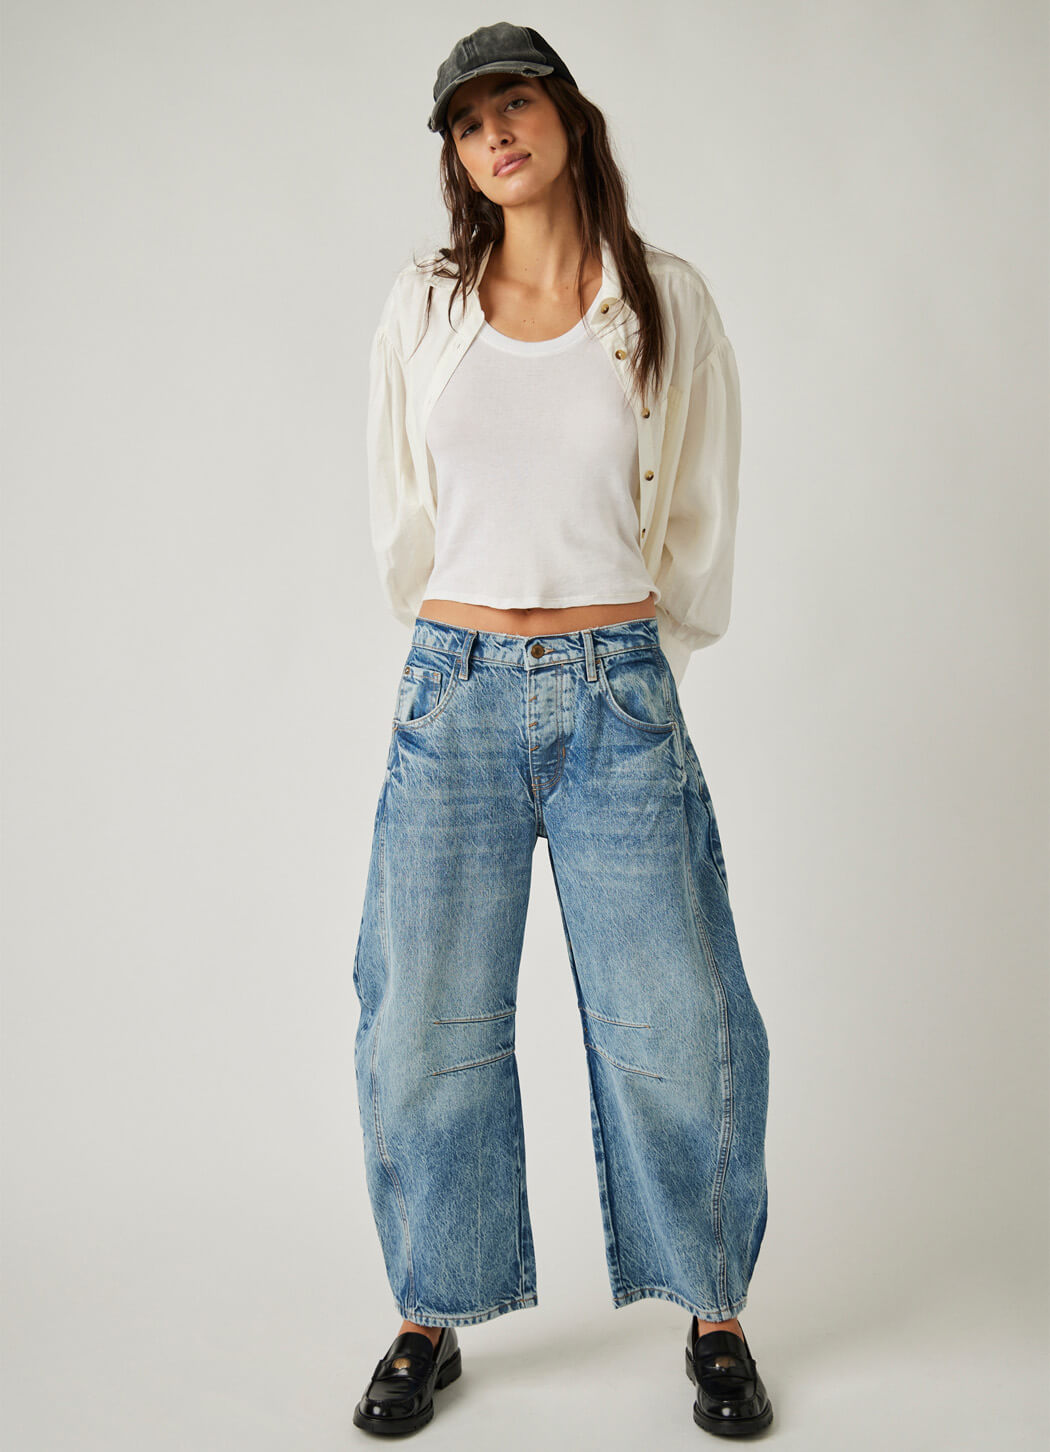 Free People Lucky You Mid Rise Jeans